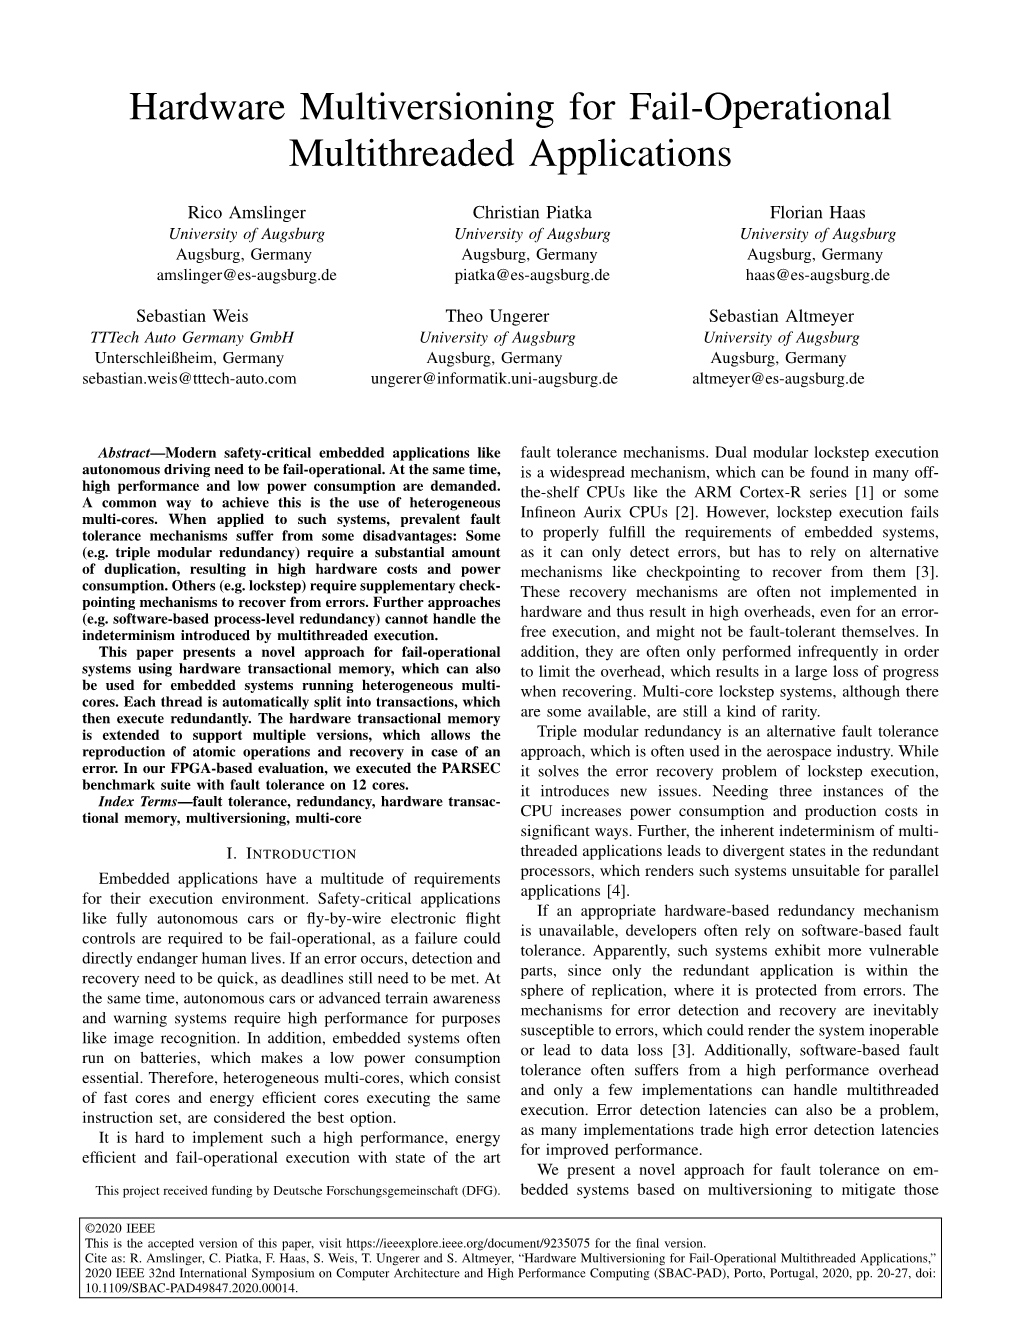 Hardware Multiversioning for Fail-Operational Multithreaded Applications